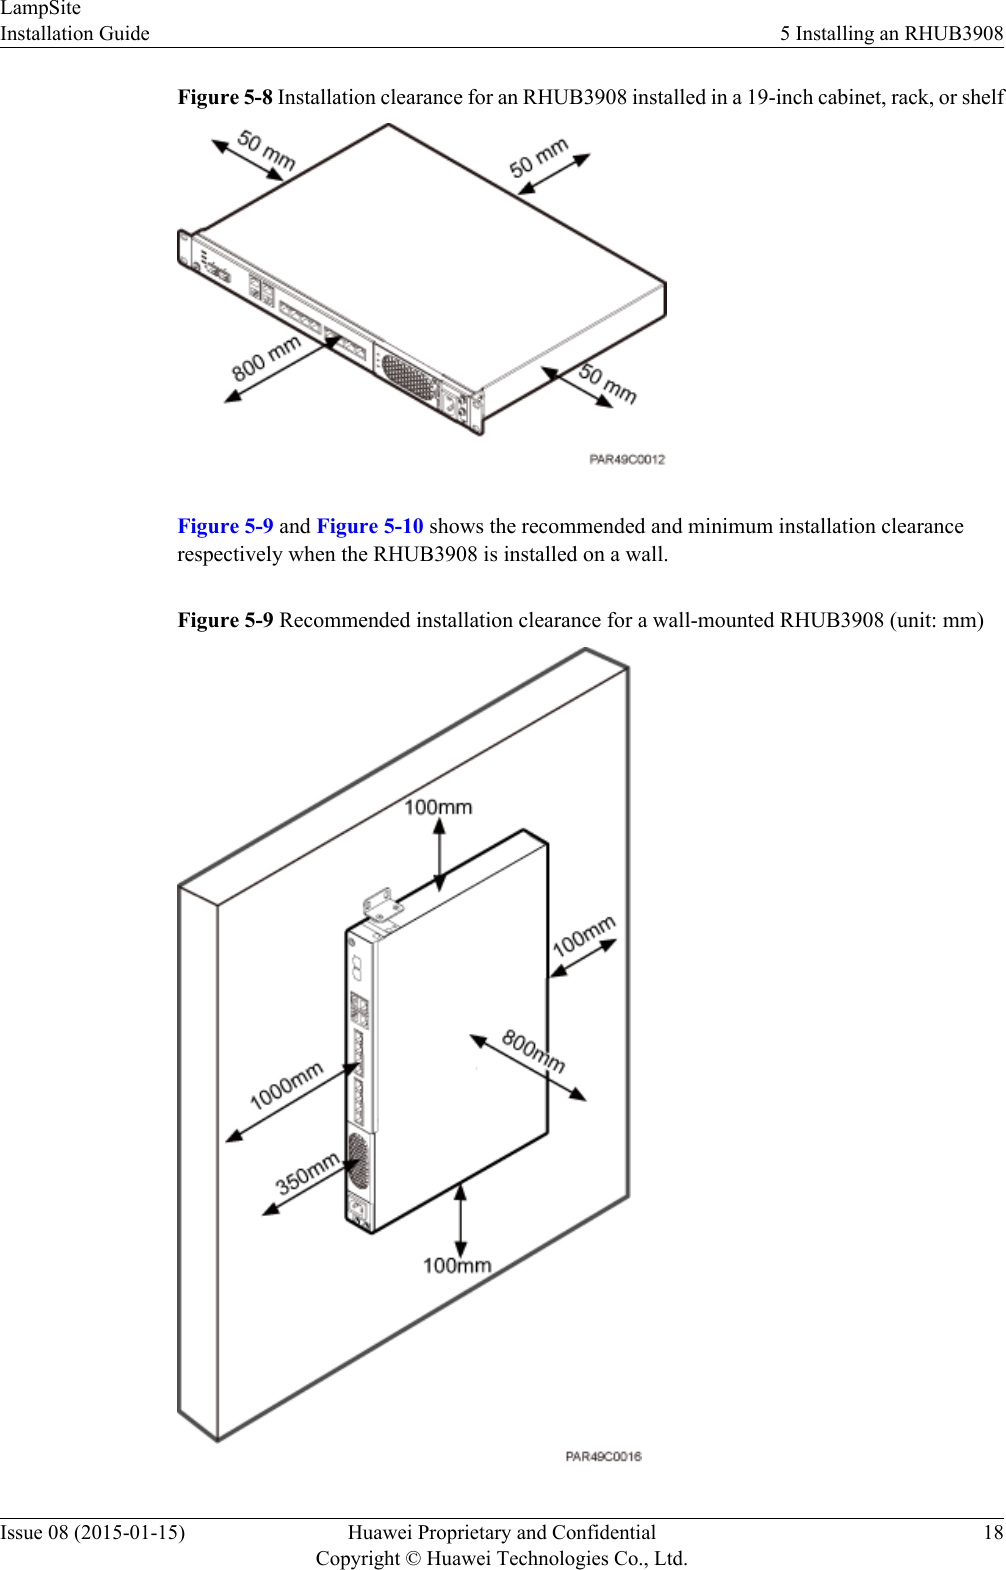 Figure 5-8 Installation clearance for an RHUB3908 installed in a 19-inch cabinet, rack, or shelfFigure 5-9 and Figure 5-10 shows the recommended and minimum installation clearancerespectively when the RHUB3908 is installed on a wall.Figure 5-9 Recommended installation clearance for a wall-mounted RHUB3908 (unit: mm)LampSiteInstallation Guide 5 Installing an RHUB3908Issue 08 (2015-01-15) Huawei Proprietary and ConfidentialCopyright © Huawei Technologies Co., Ltd.18